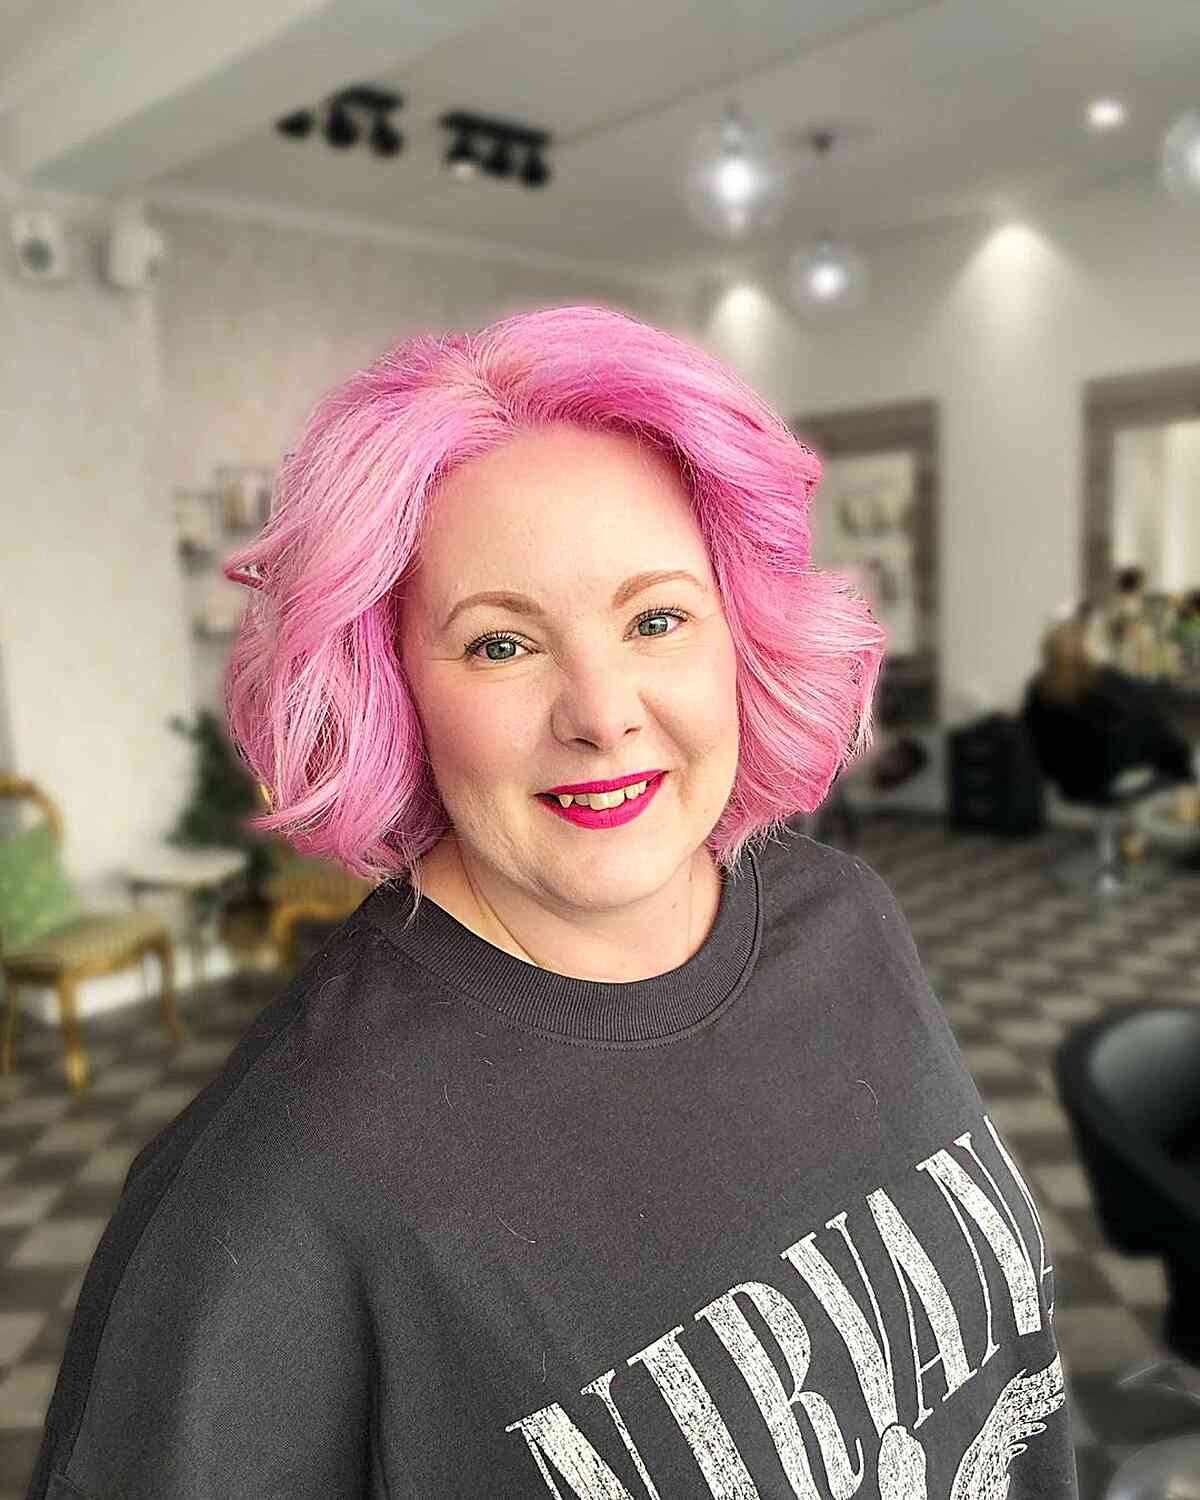 Funky Pink Bob Cut for ladies with an edgy style and short hair